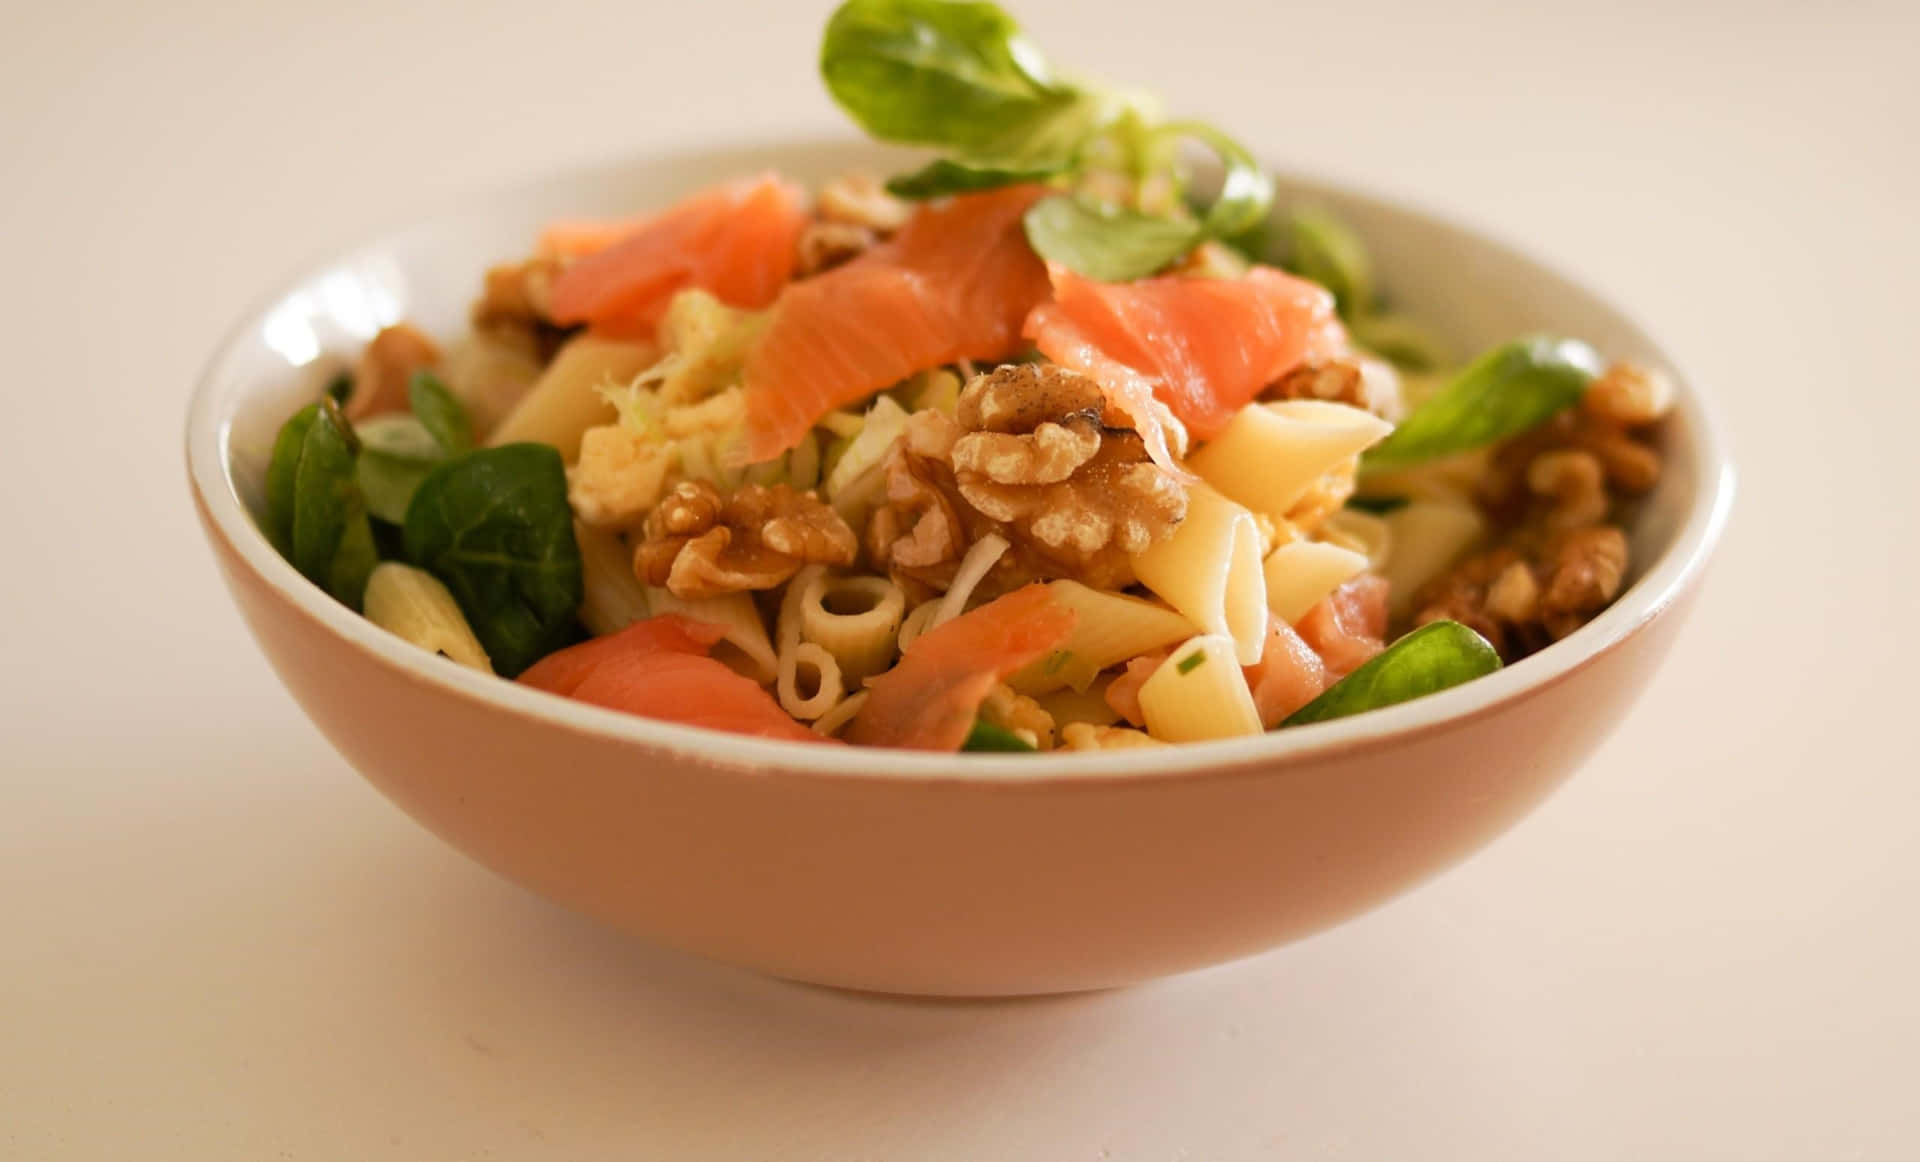 A Bowl Of Pasta With Walnuts And Salmon